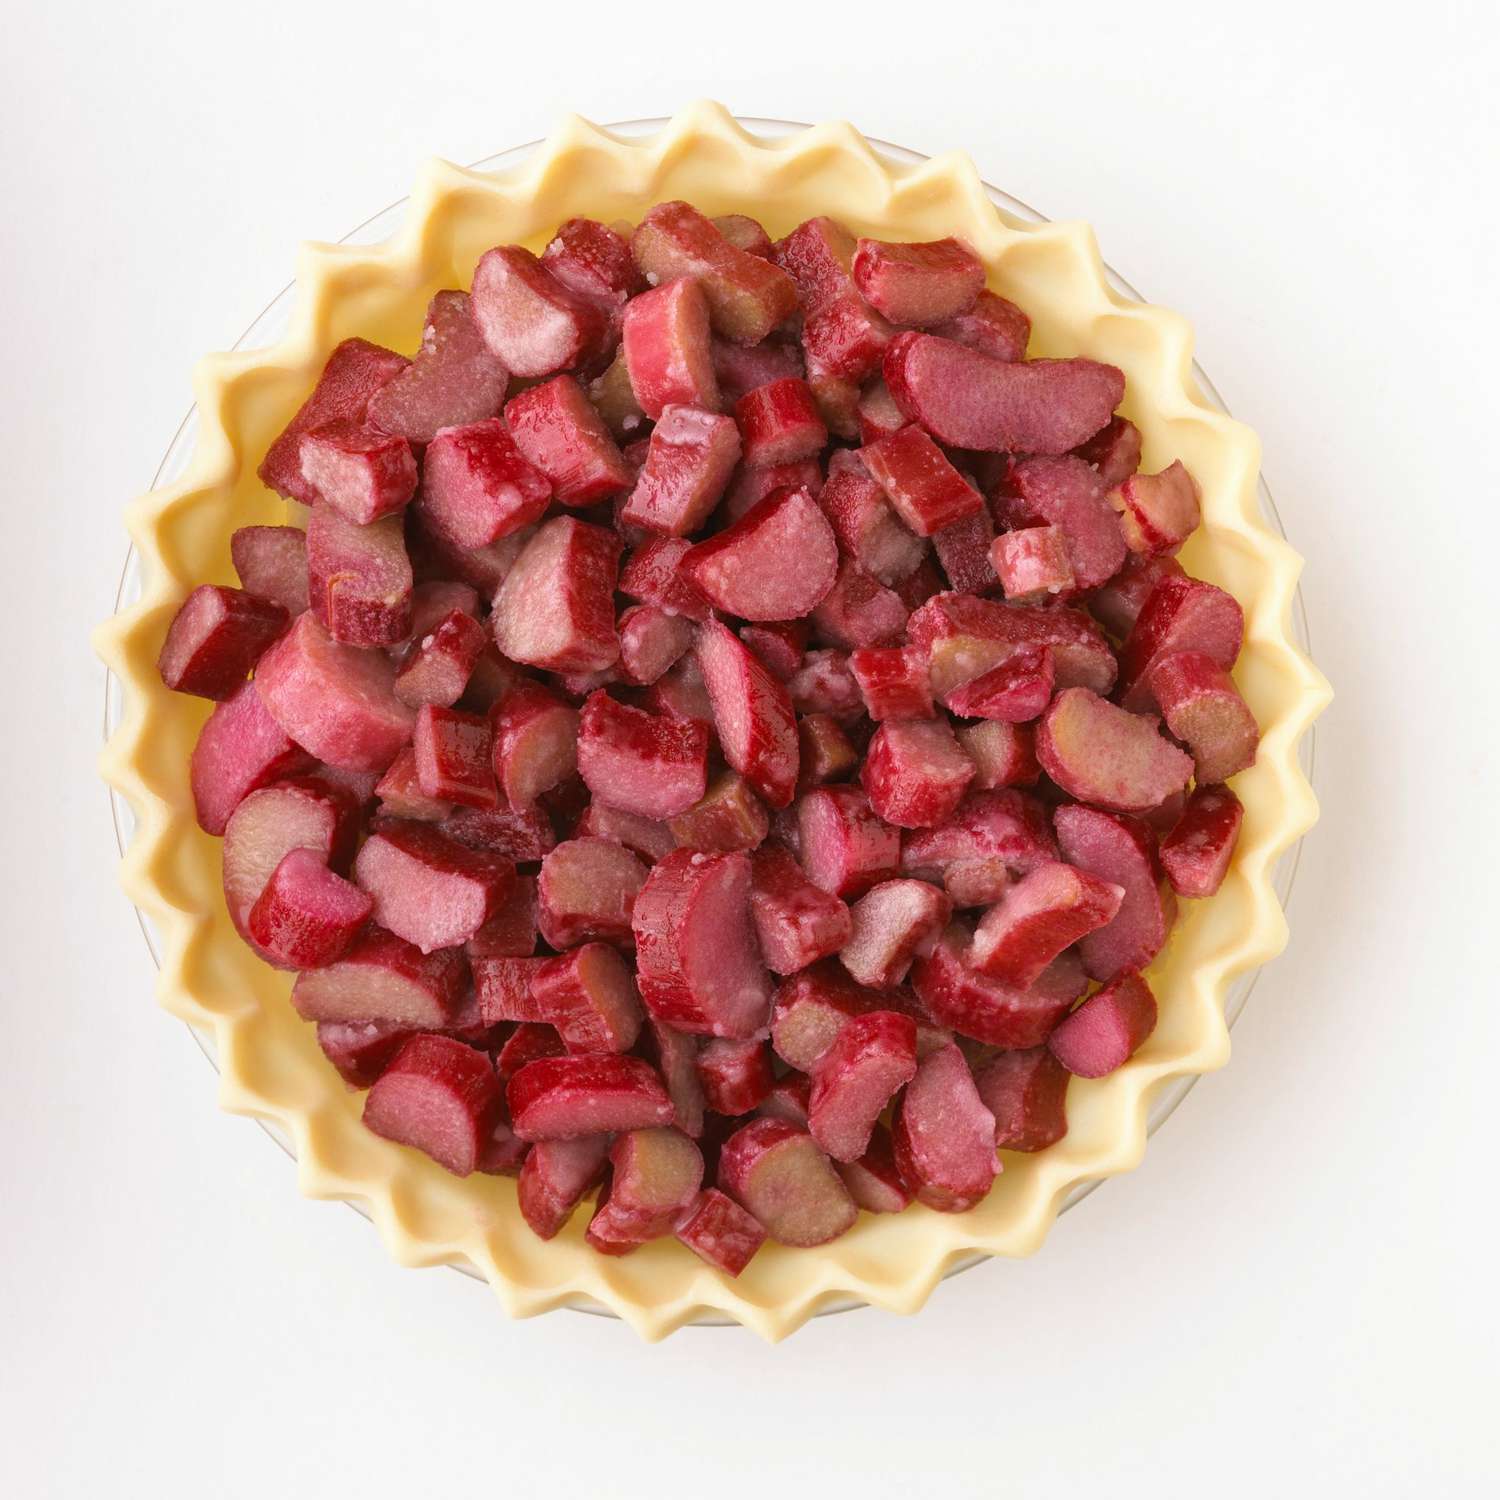 rhubarb pieces in pie shell